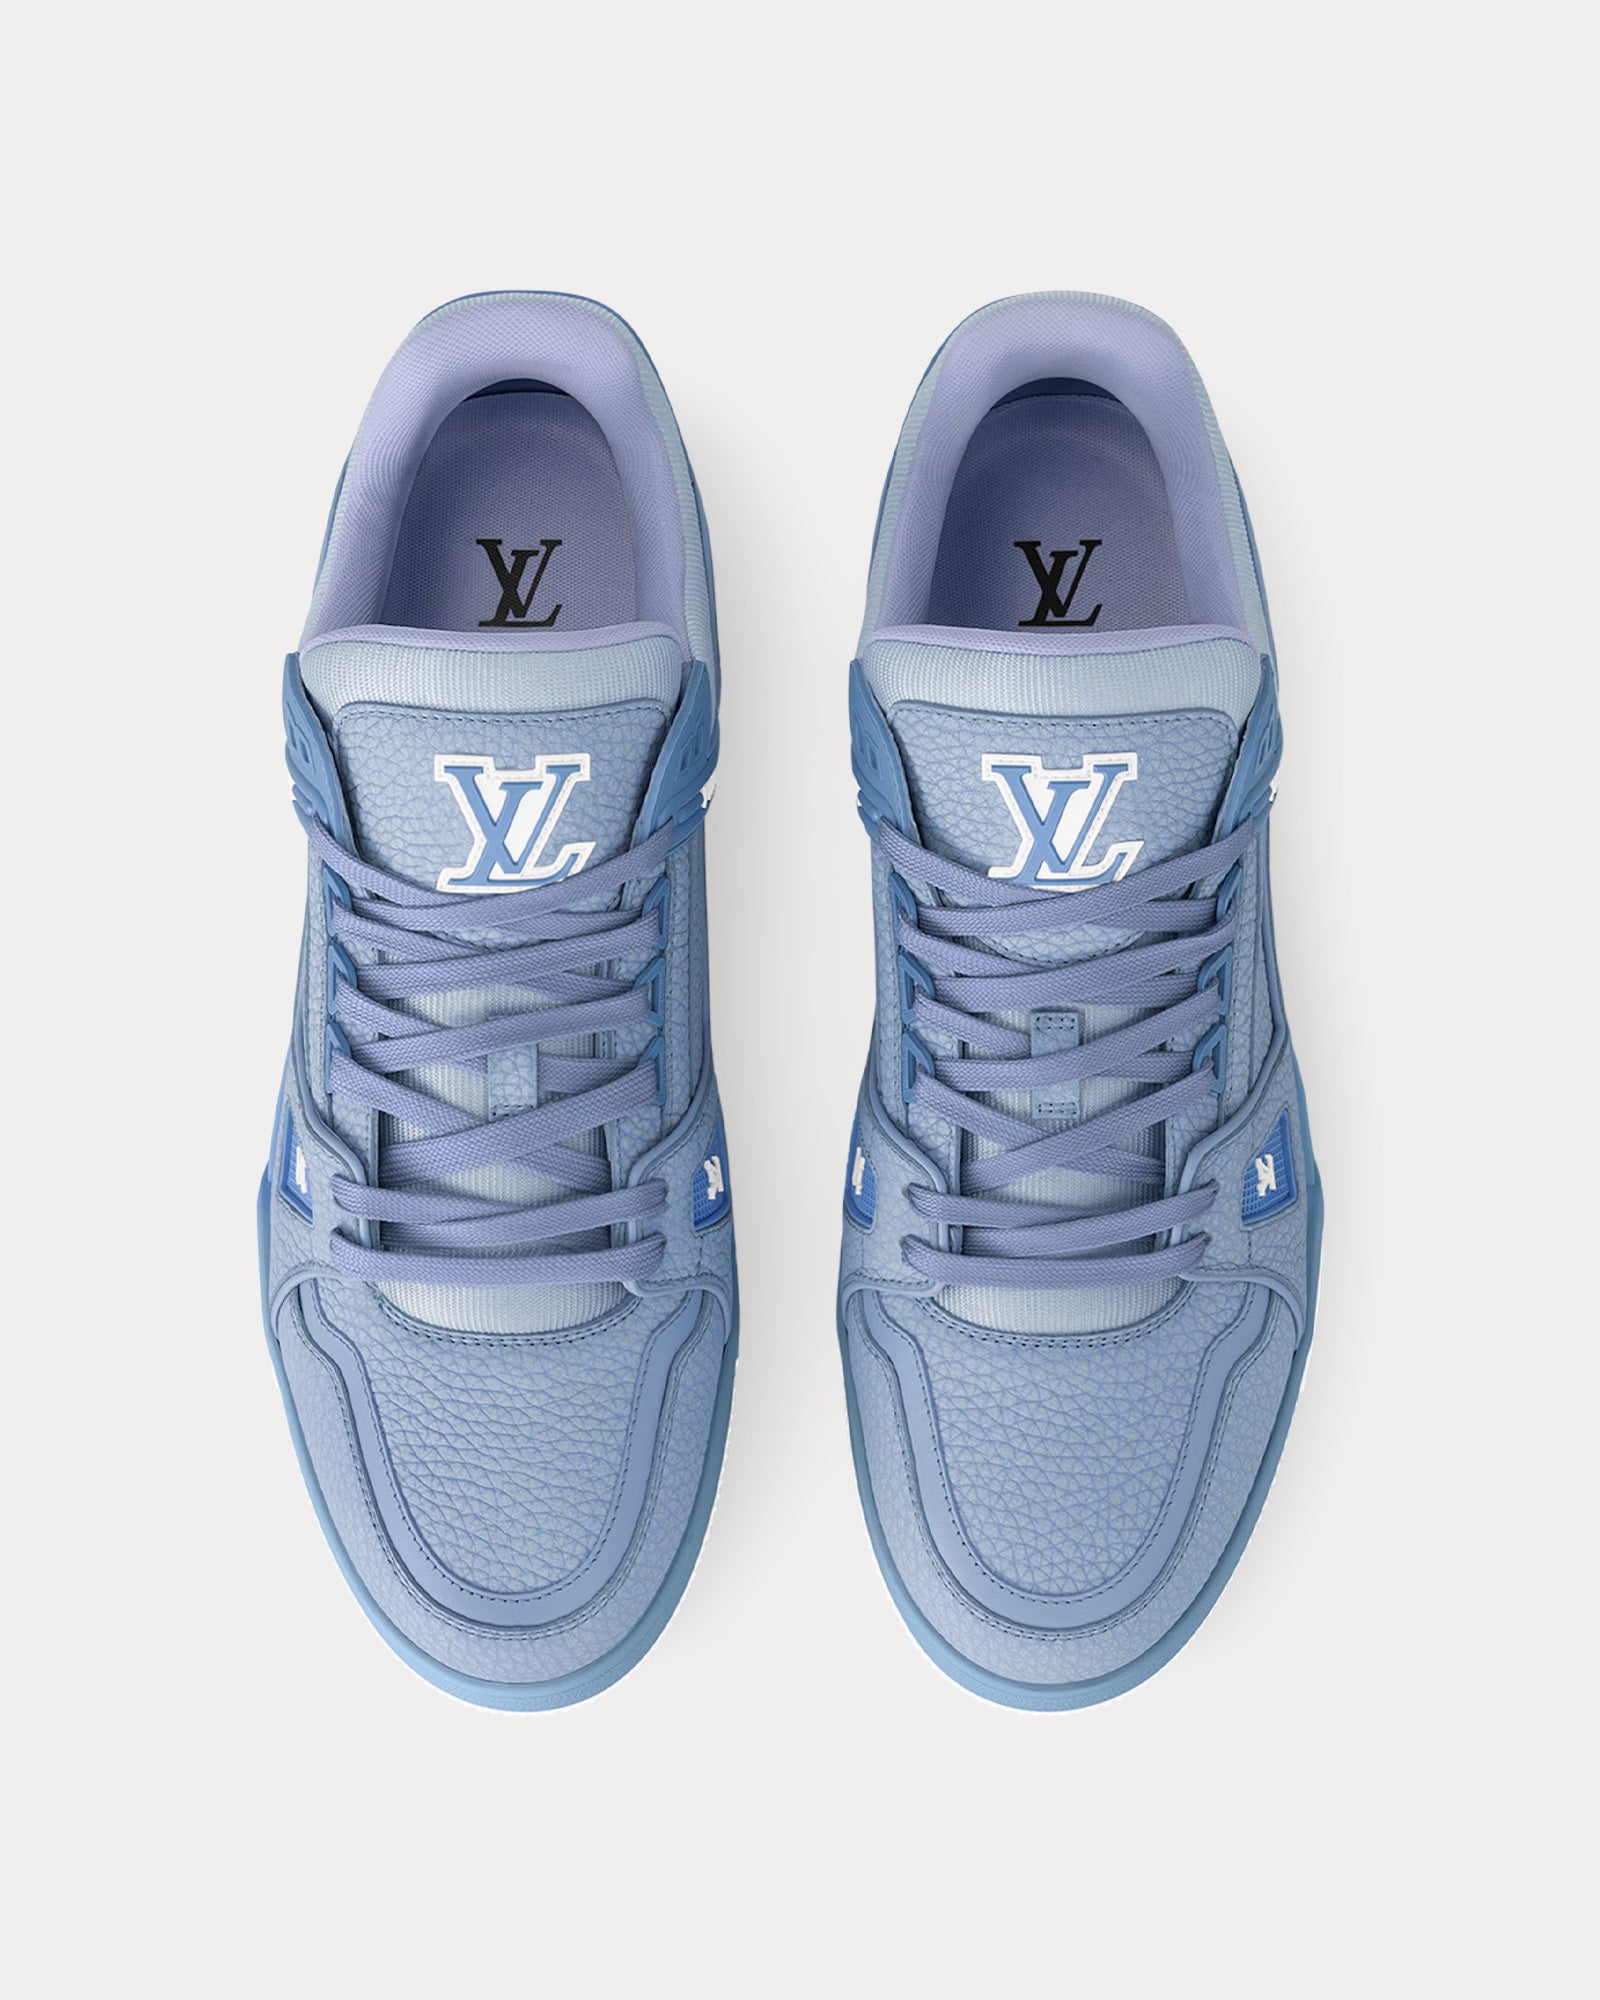 Louis Vuitton - LV Trainer Grained Calf Leather Pastel Blue Low Top Sneakers